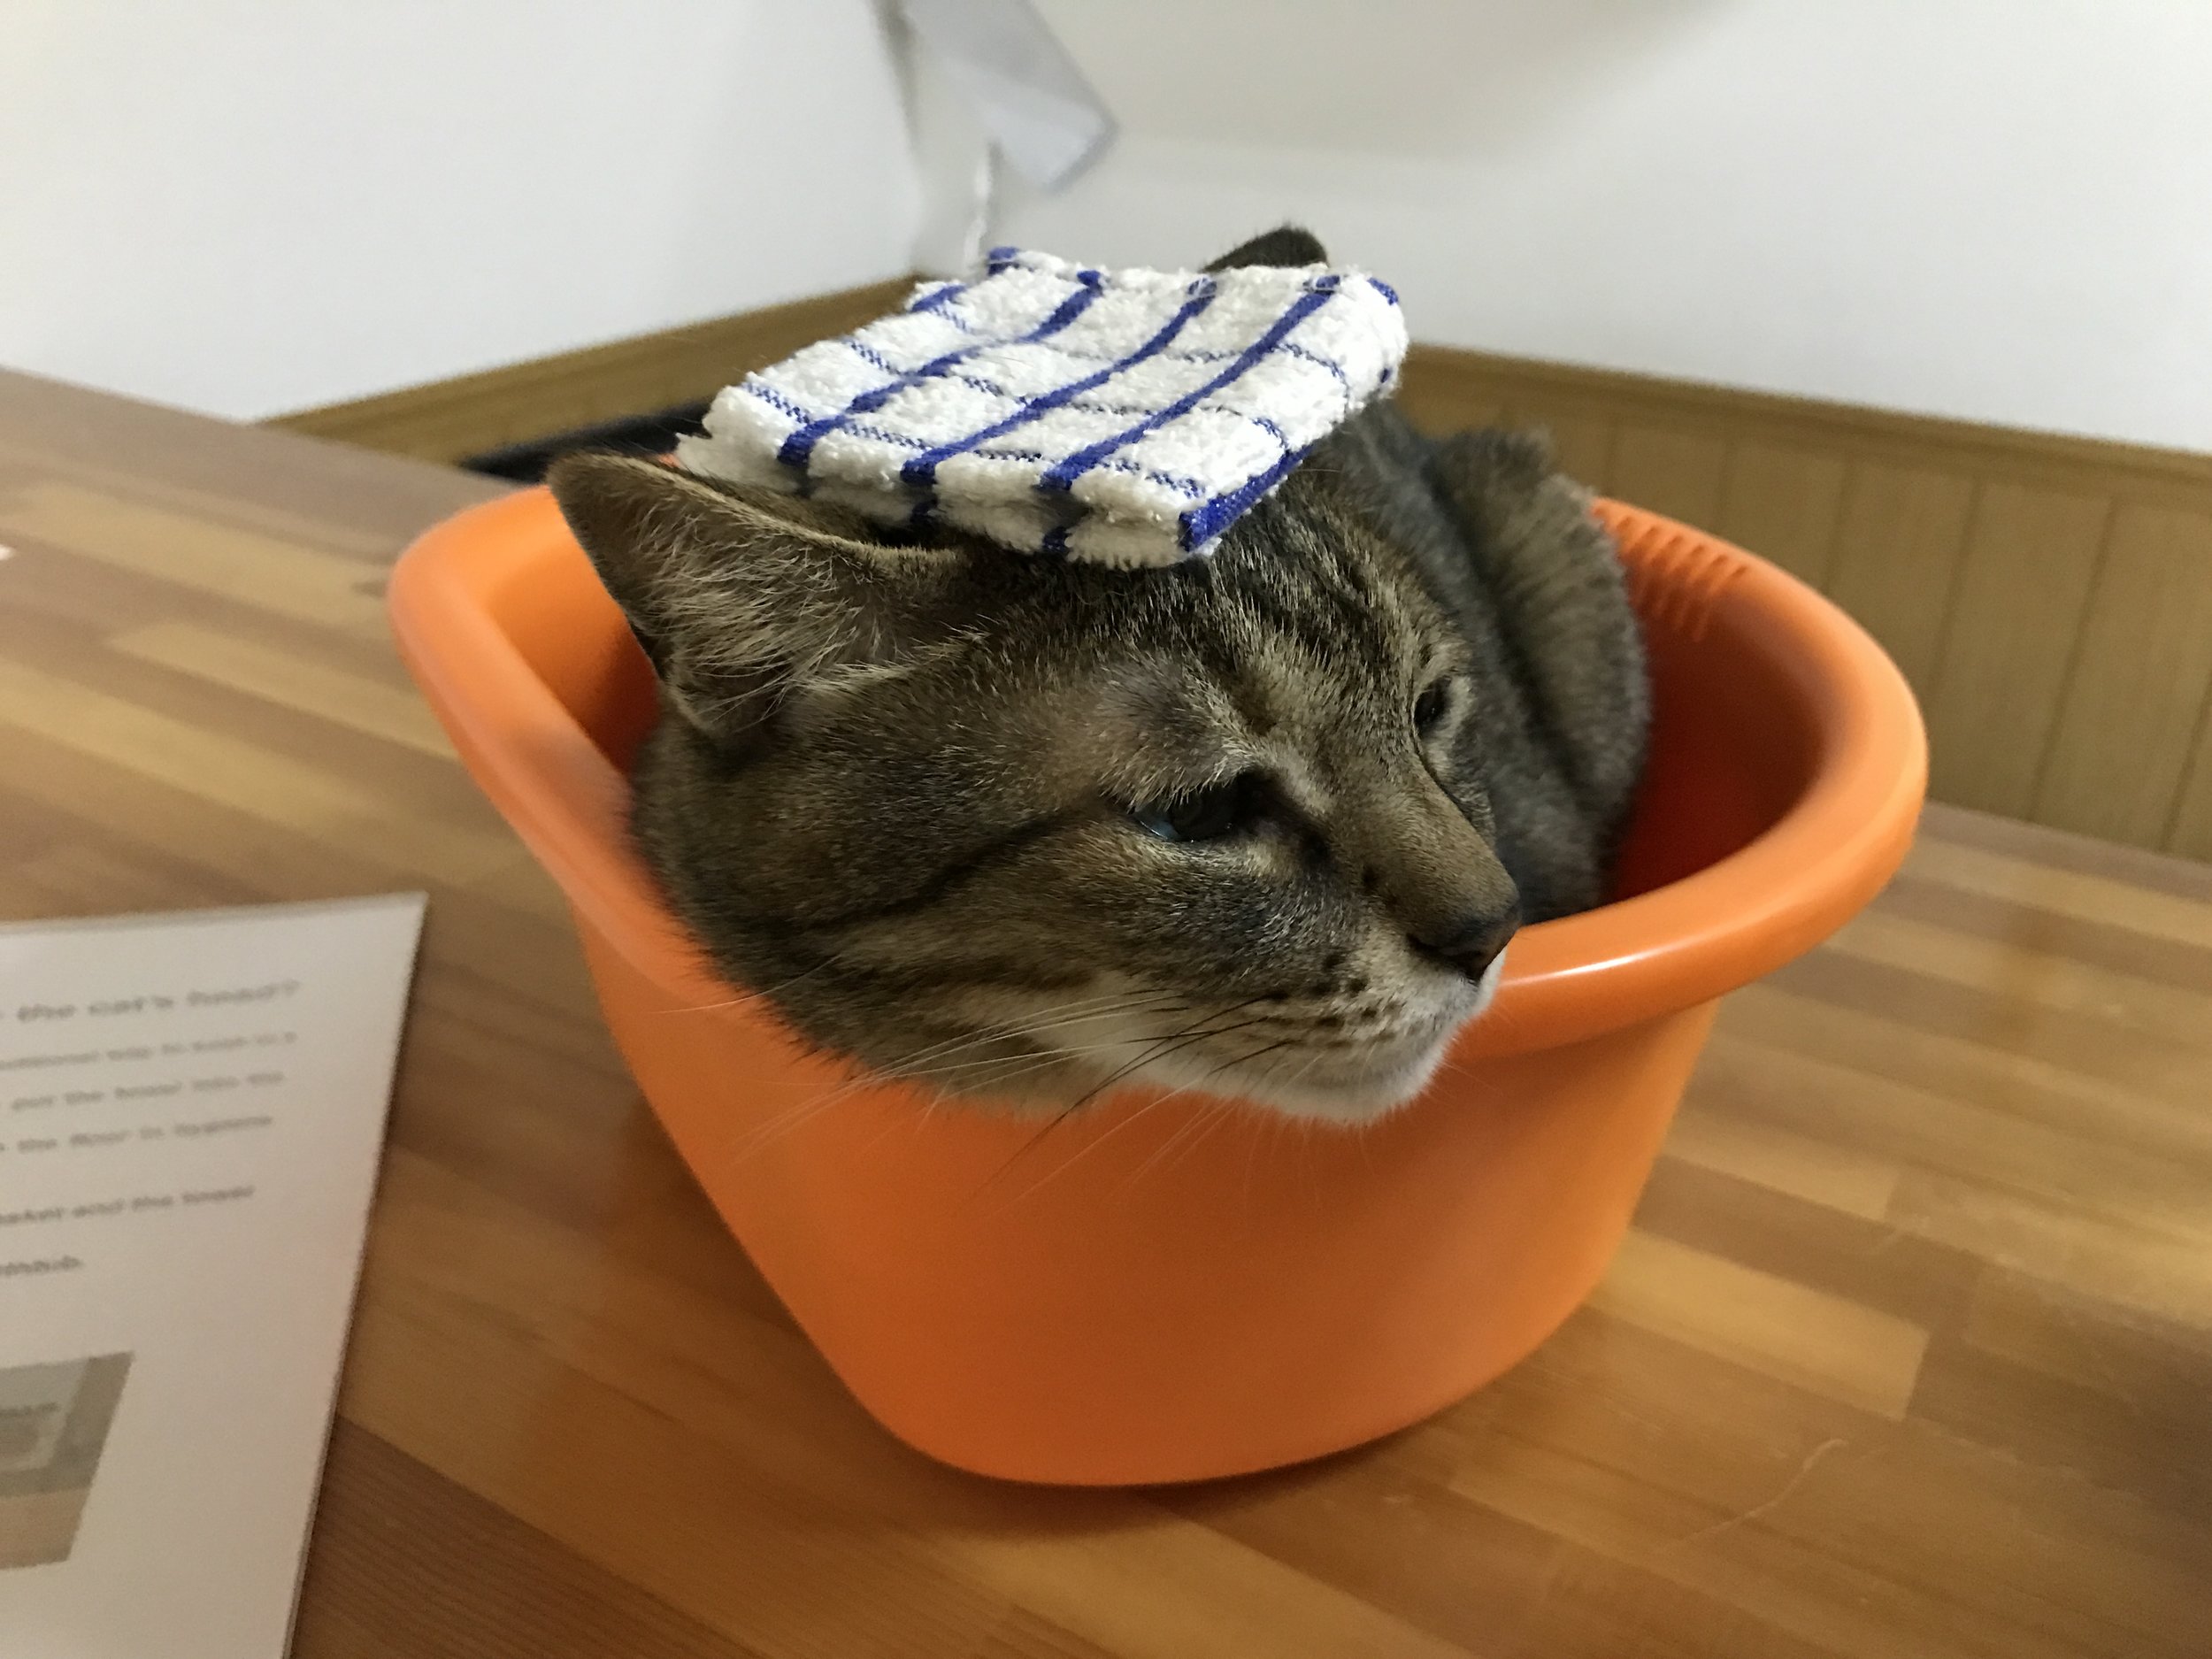 A cat relaxes with a towel on his head in honor of the Japanese bath house tradition